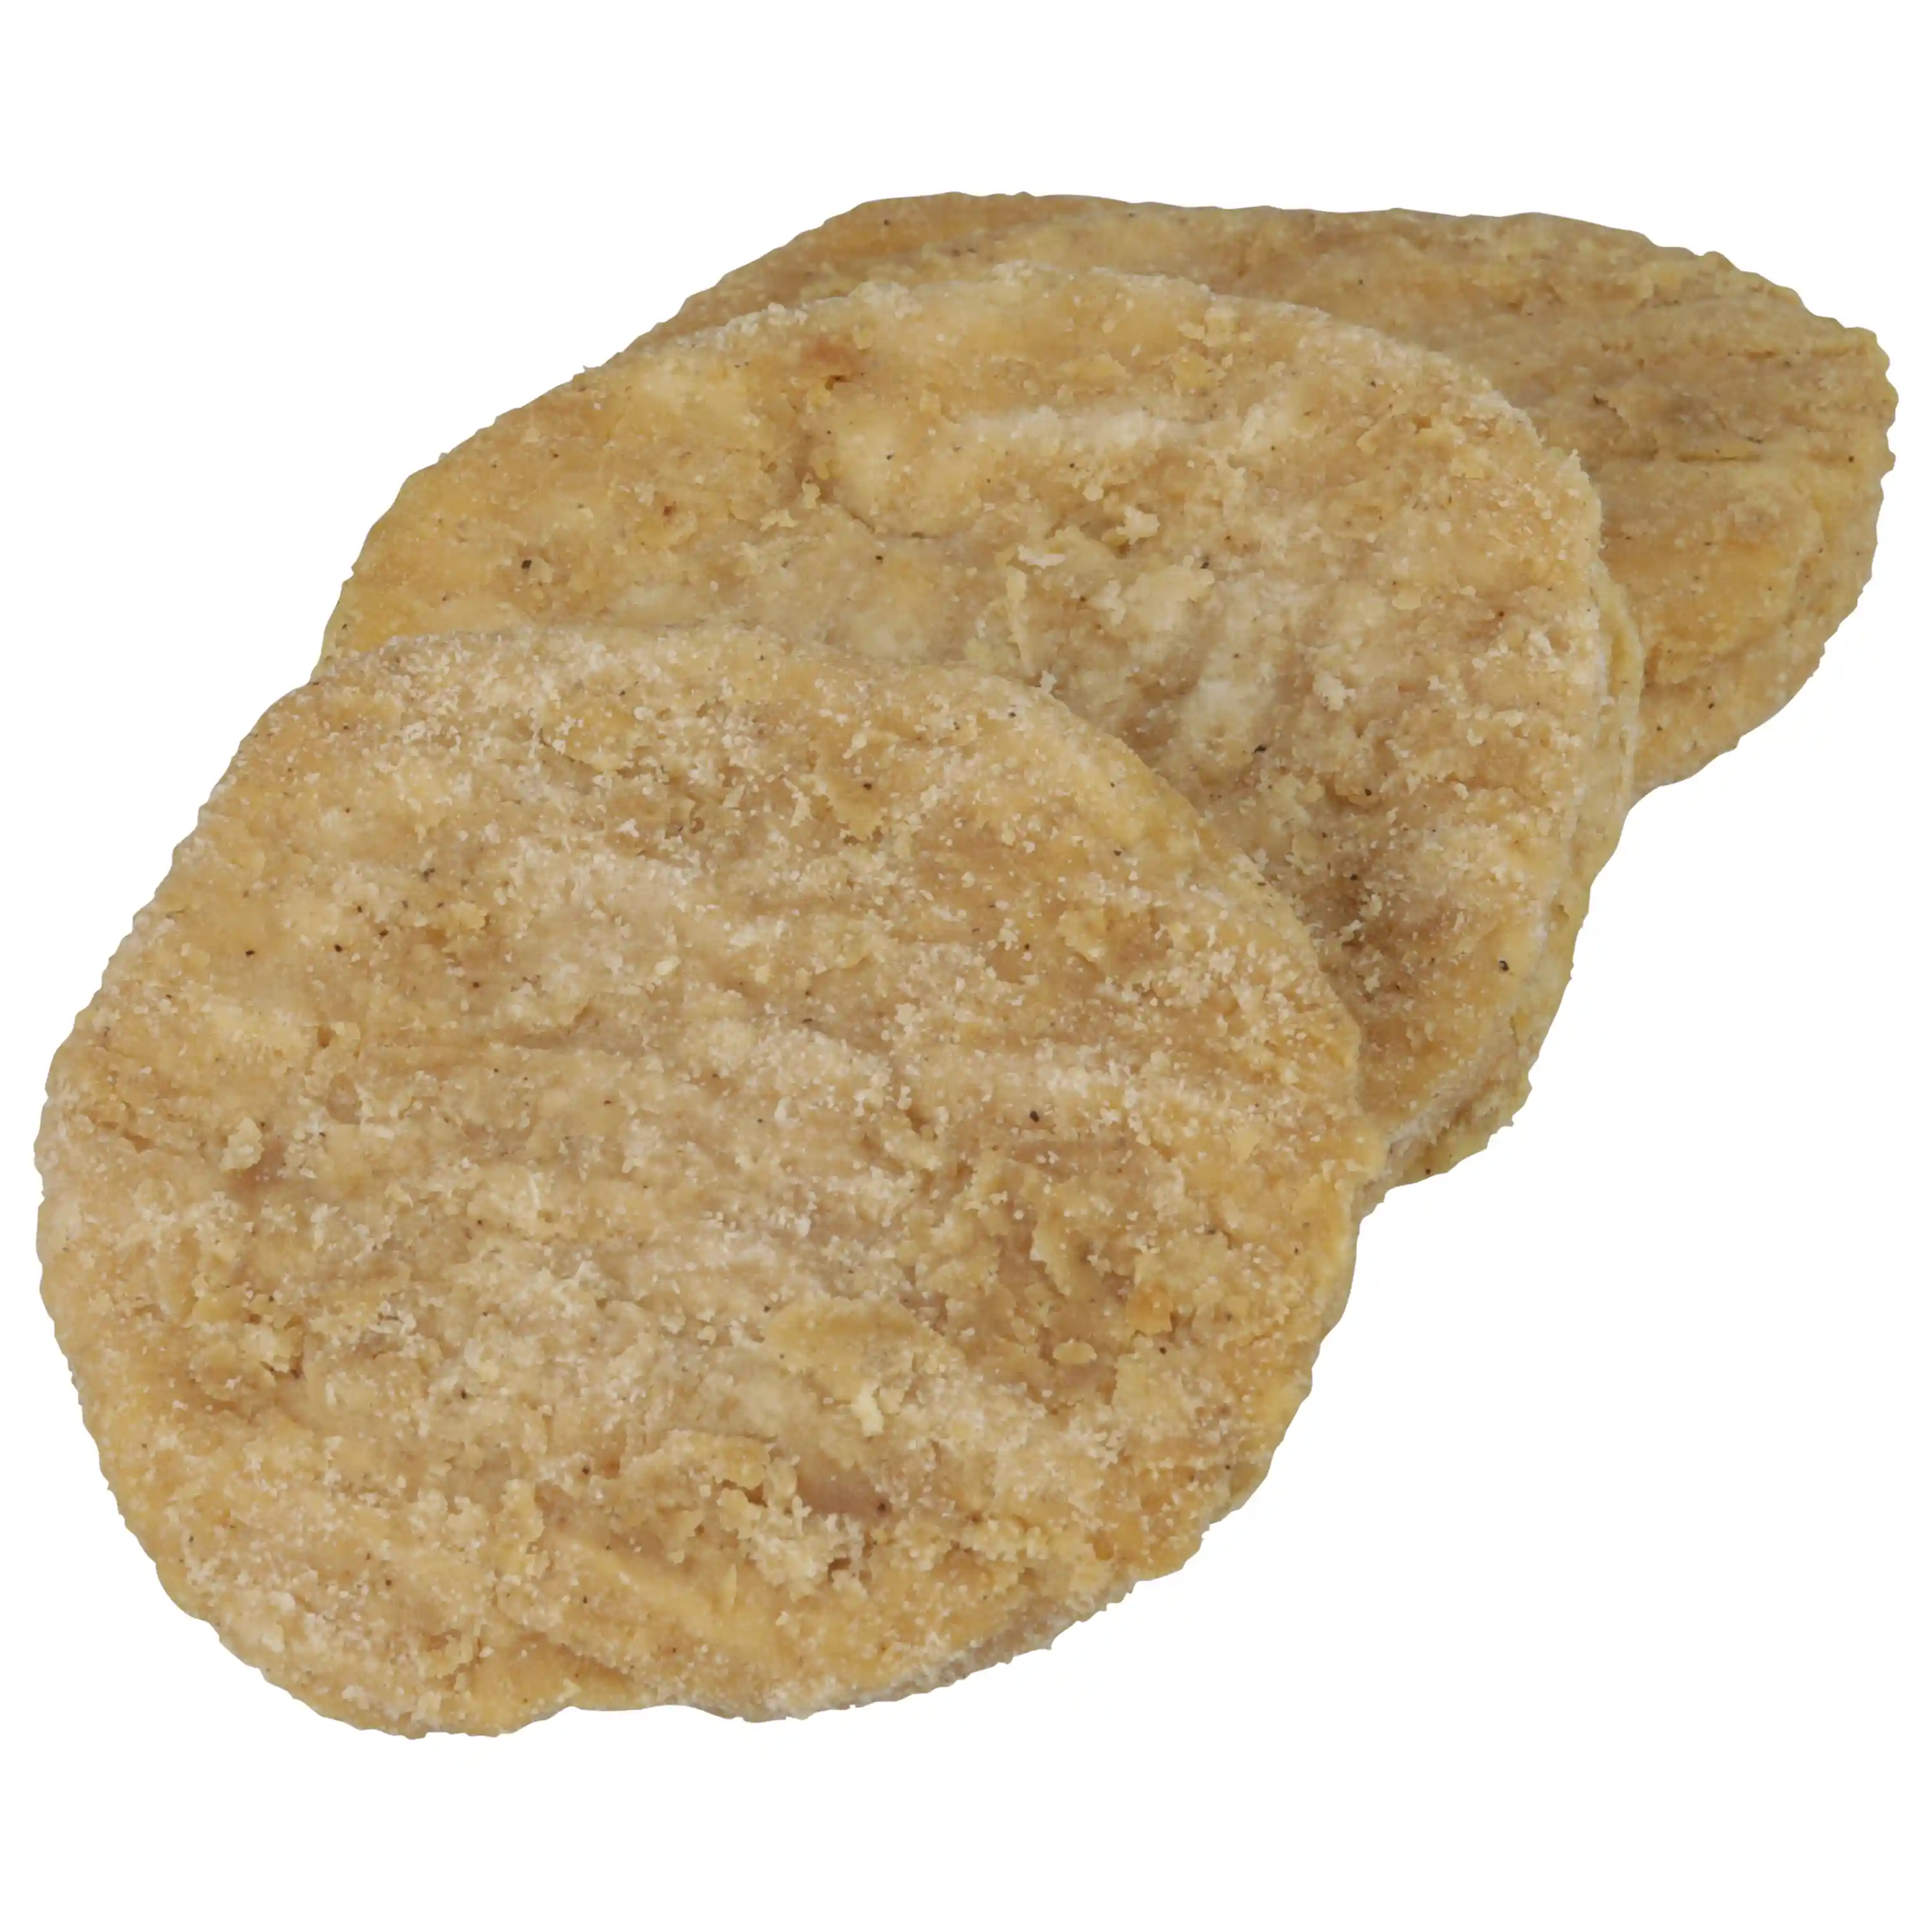 Tyson® Fully Cooked Whole Grain Breaded Chicken Breast Patties, CN, 3.63 oz. _image_11